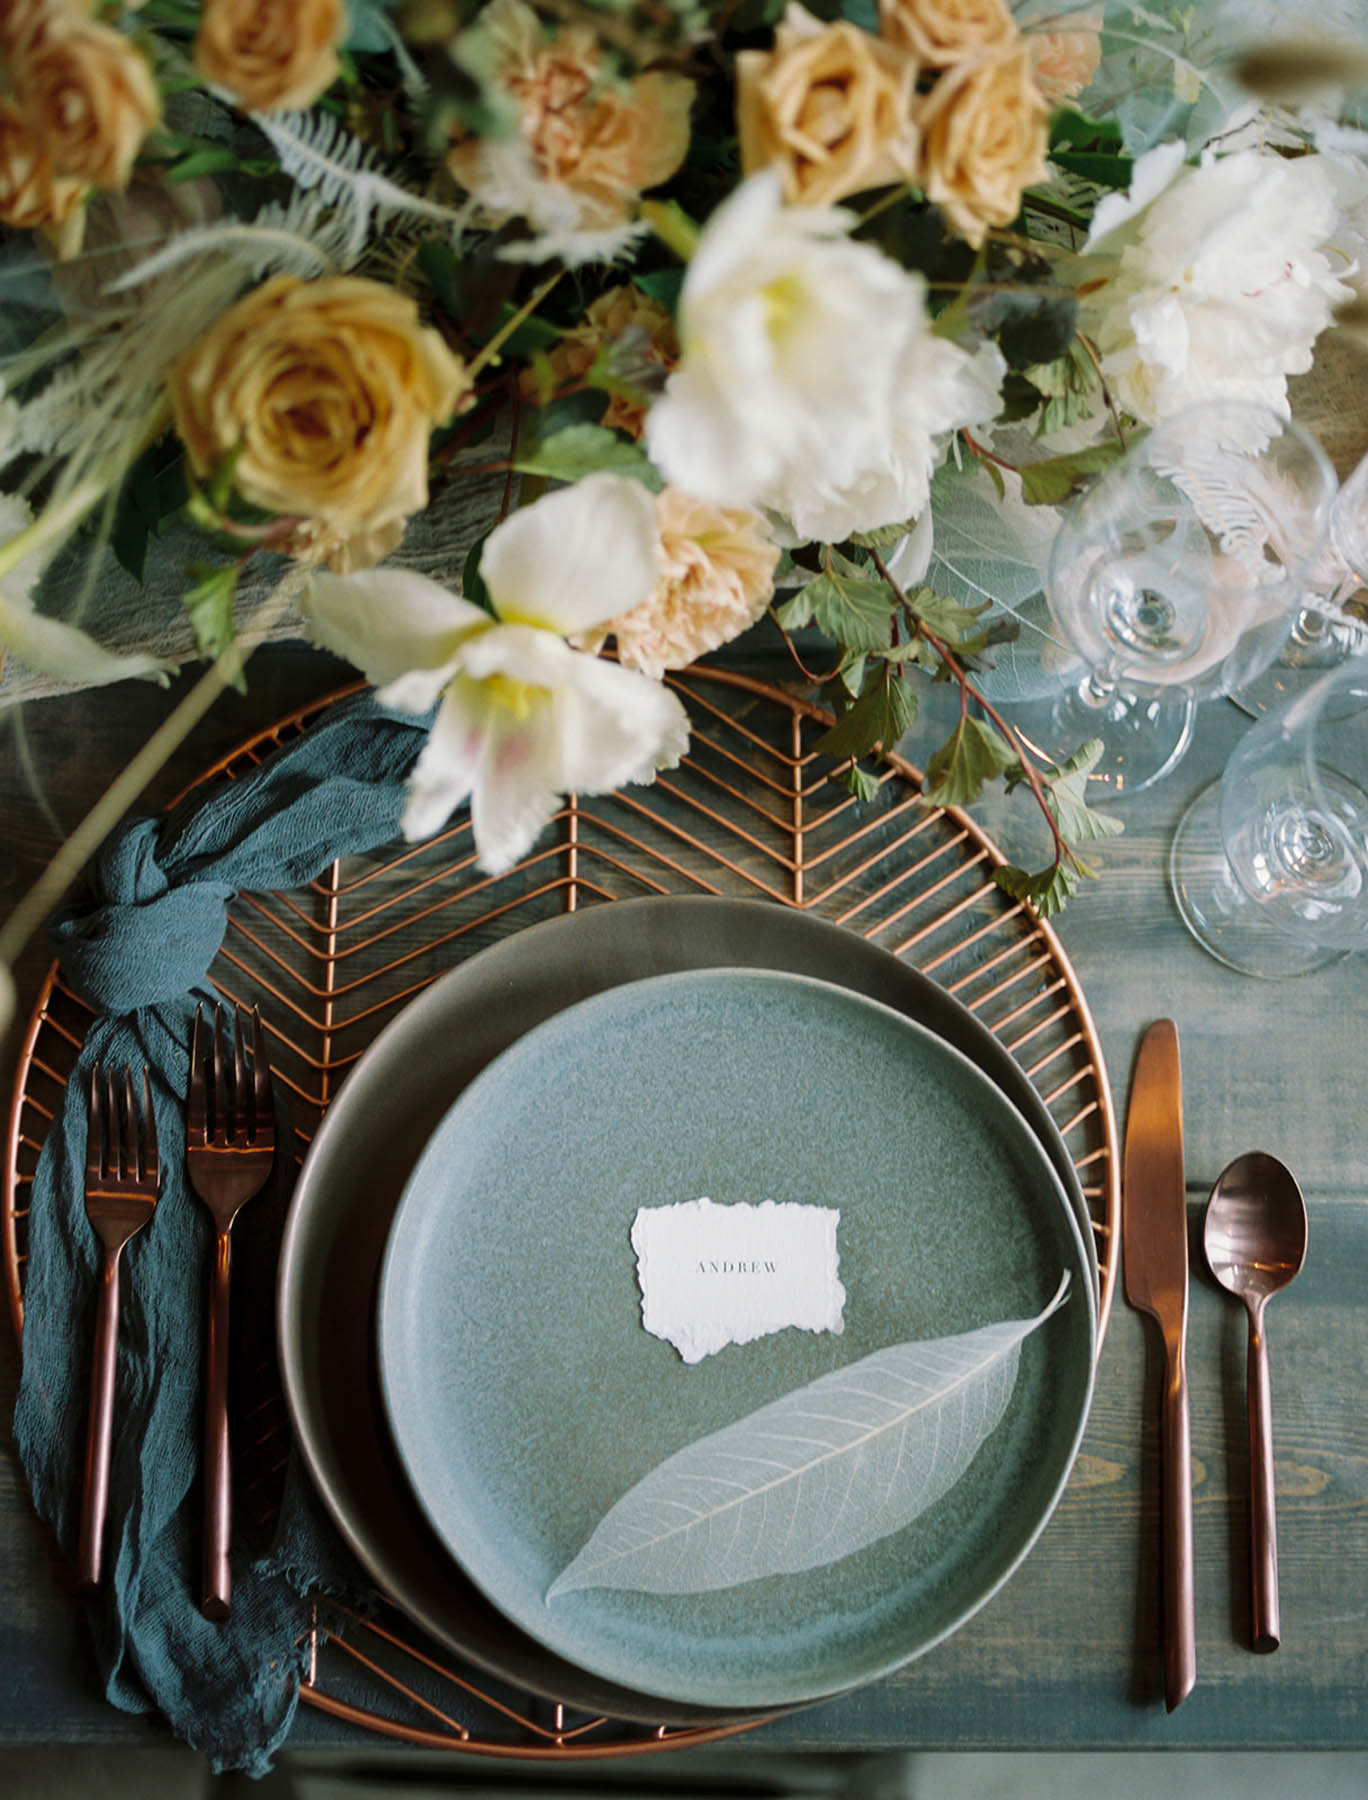 A place setting with white florals and gray-green elements. There is bronze silverware and a small place card on the center of the plate. 